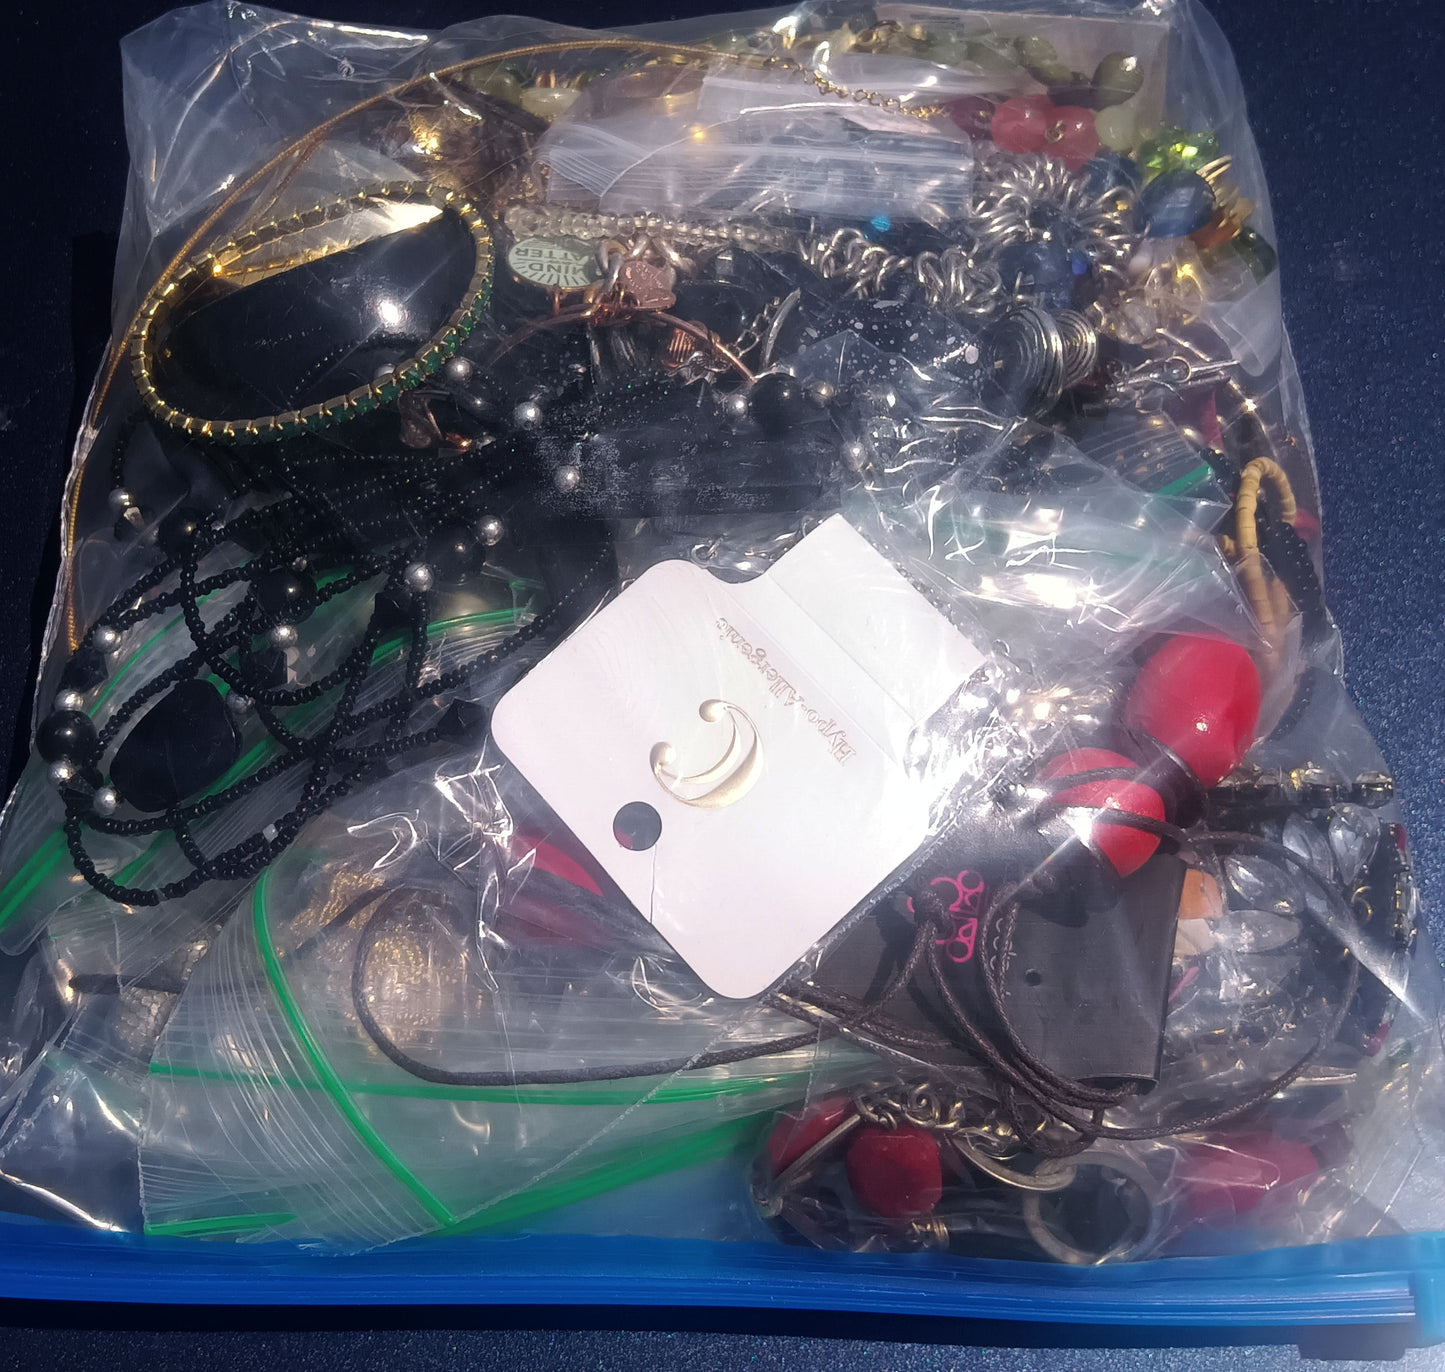 Wearable Mixed Costume Jewelry Mystery Bag #5